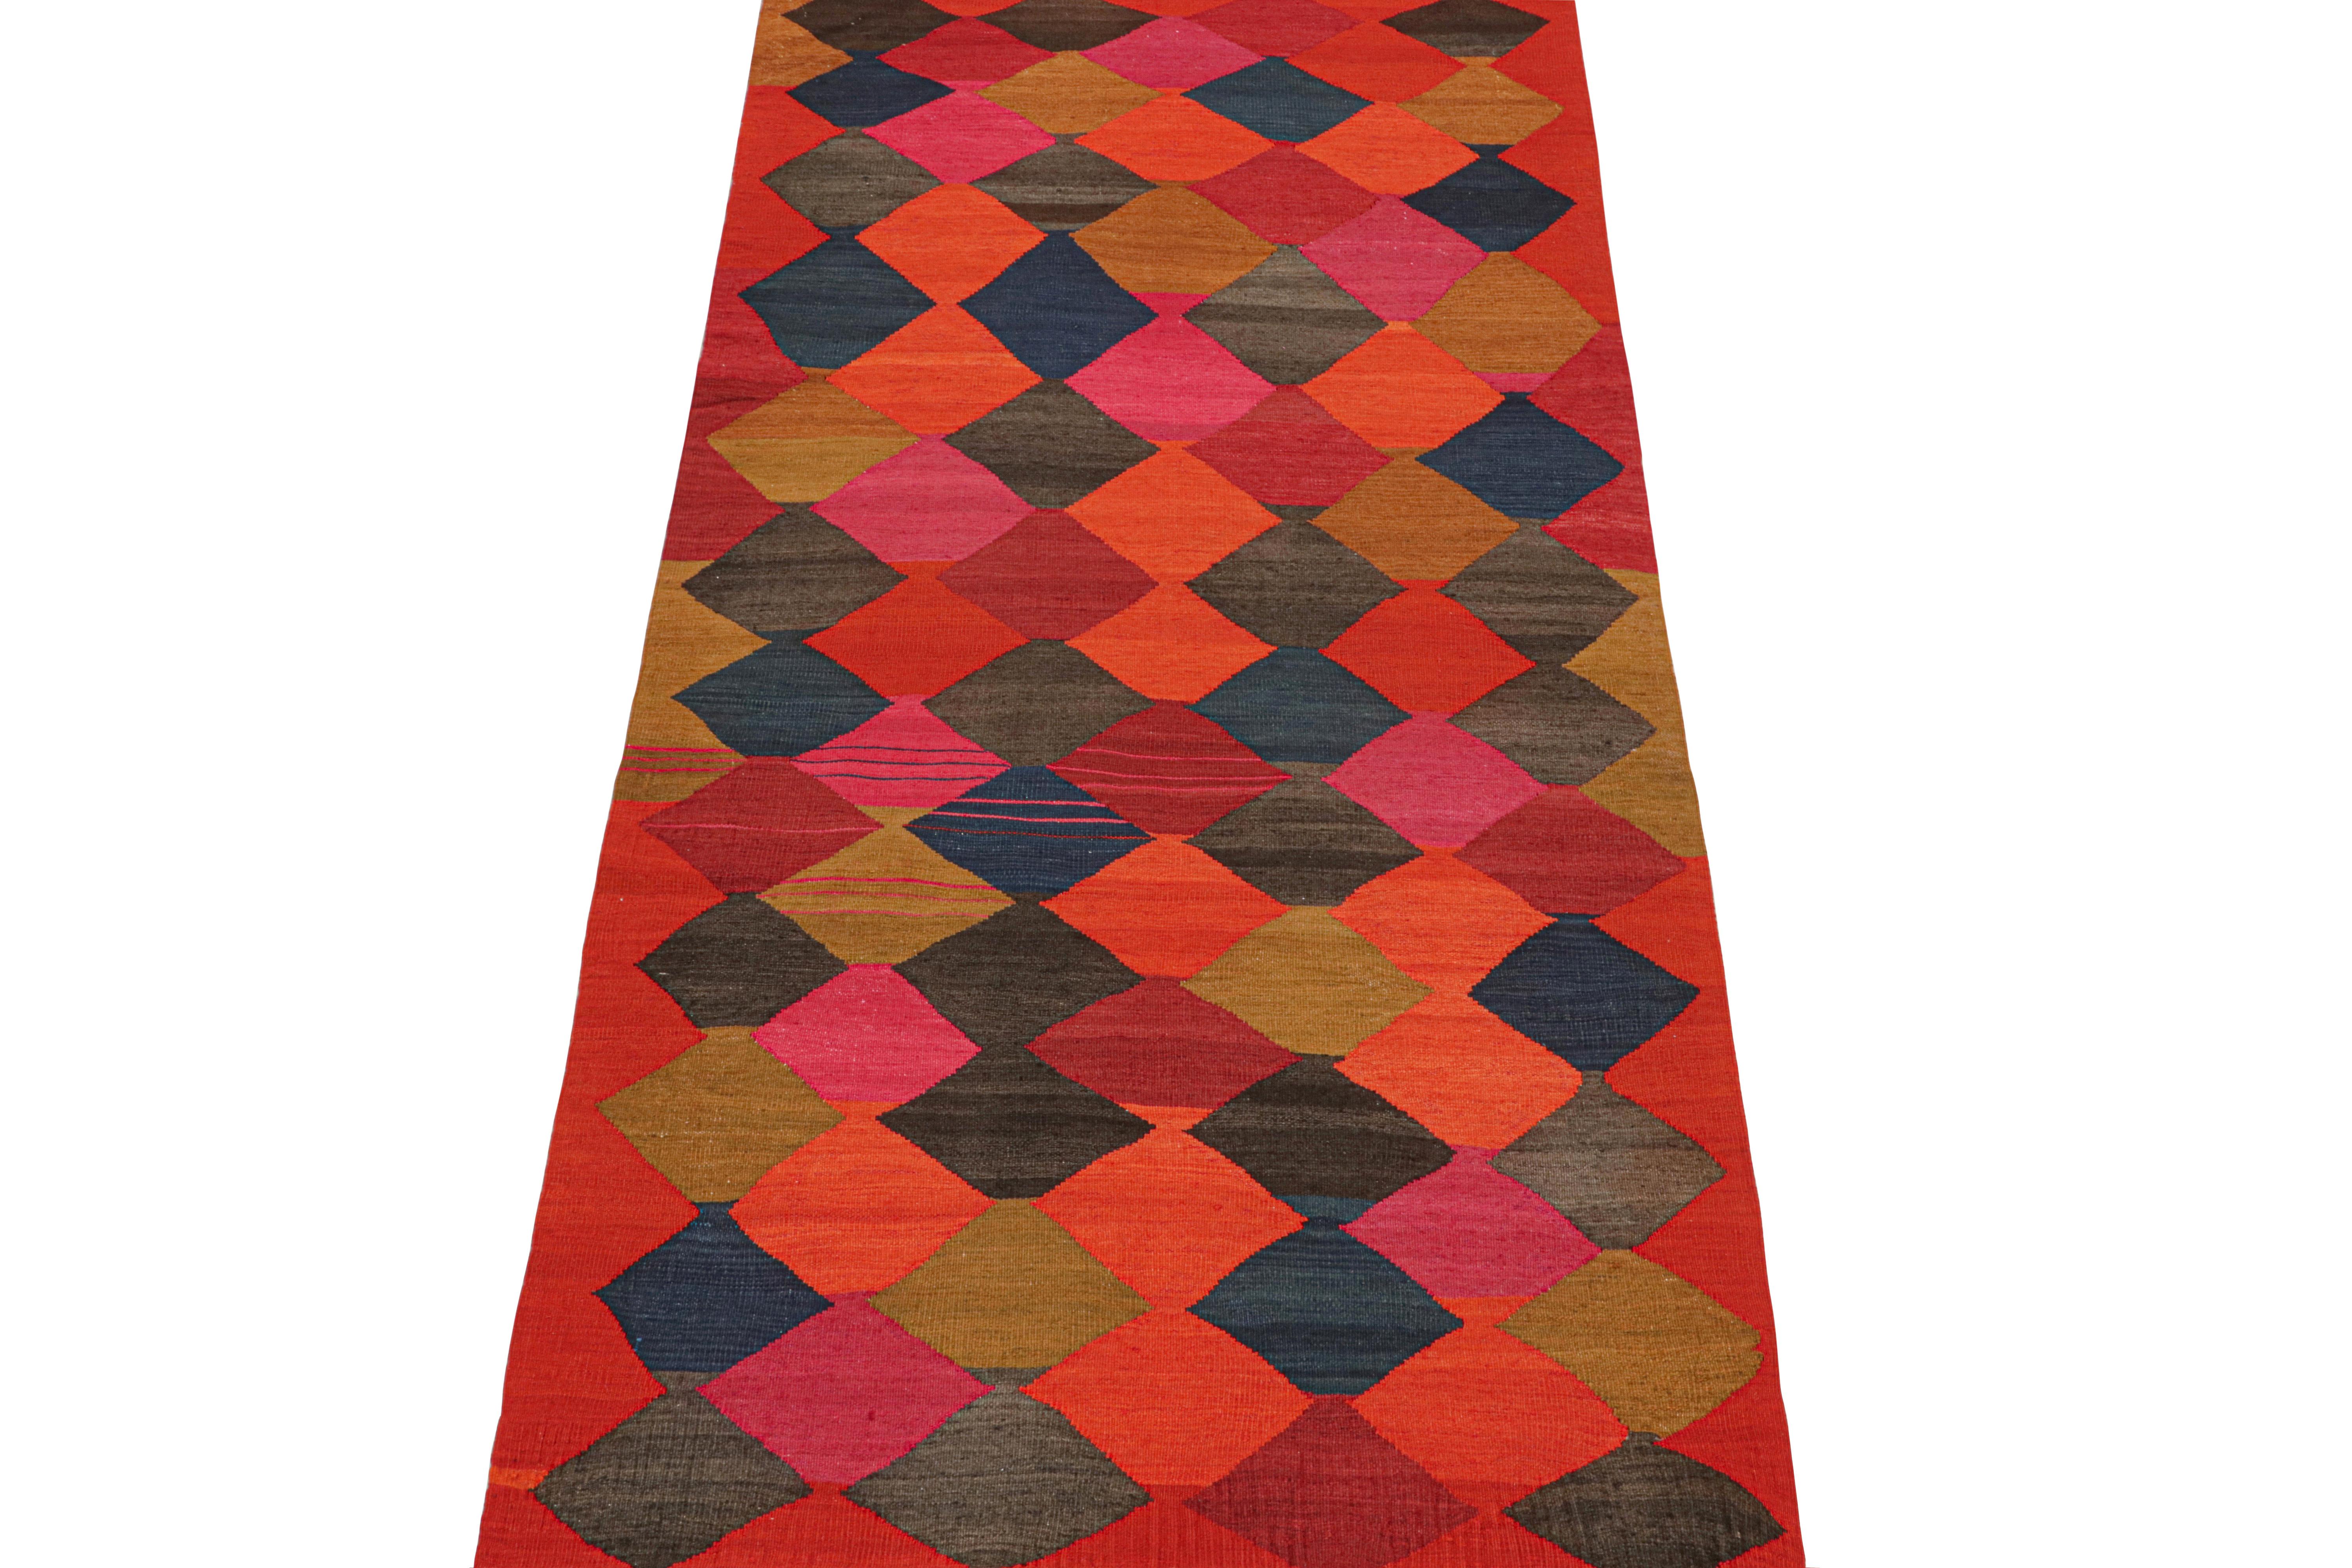 Vintage Karadagh Persian Kilim in Polychromatic Diamond Patterns In Good Condition For Sale In Long Island City, NY